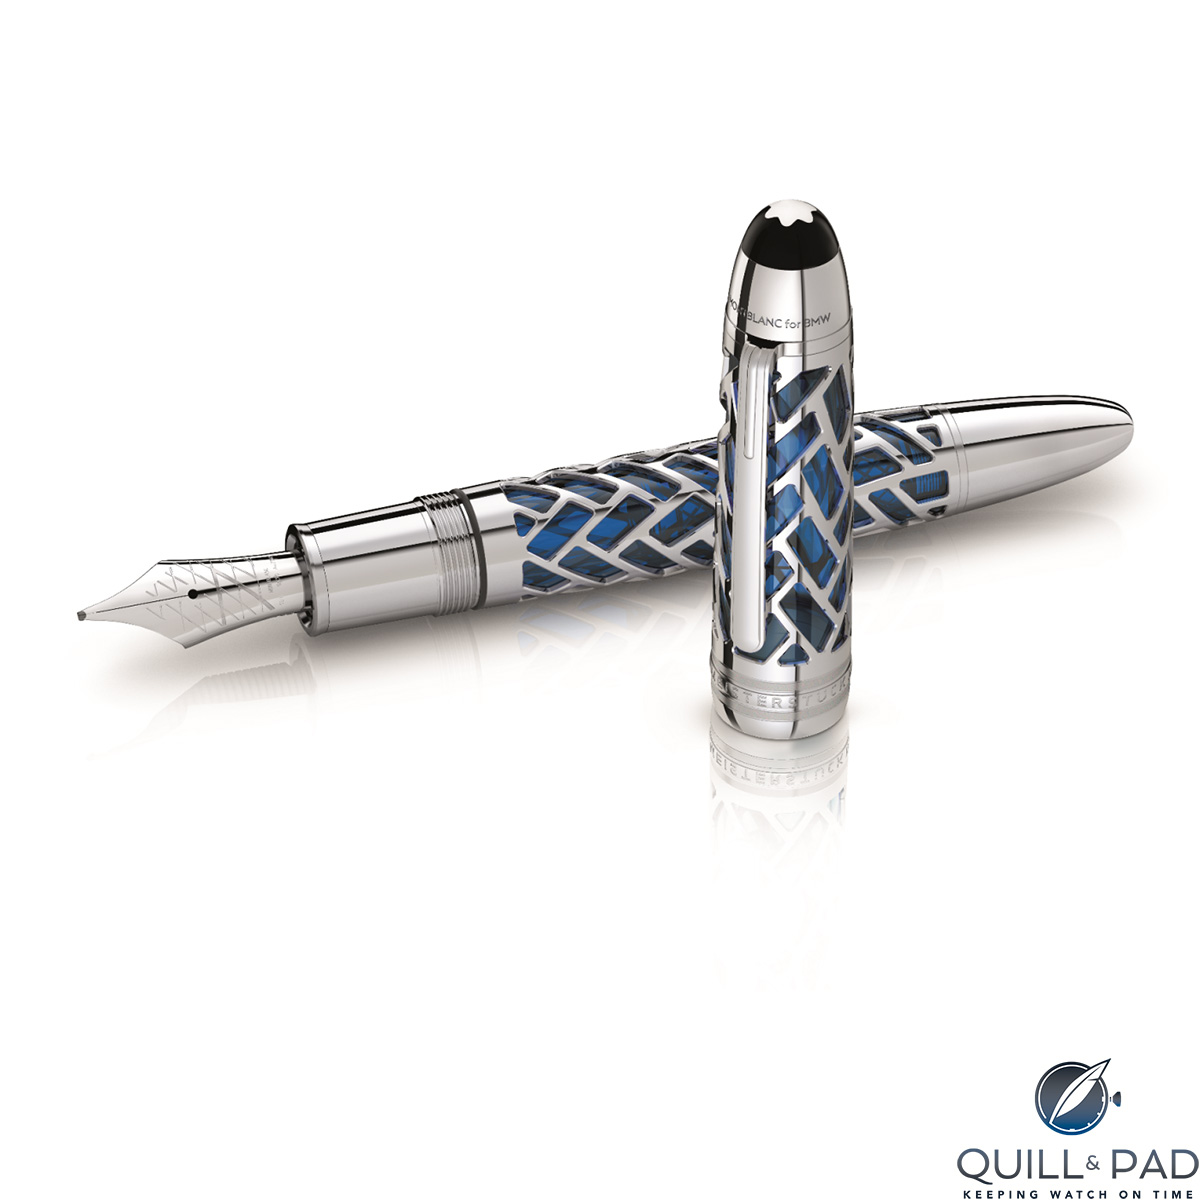 Montblanc For BMW Centennial Fountain Pen: Celebrating The BMW 7 Series Jubilee Edition Next 100 Years